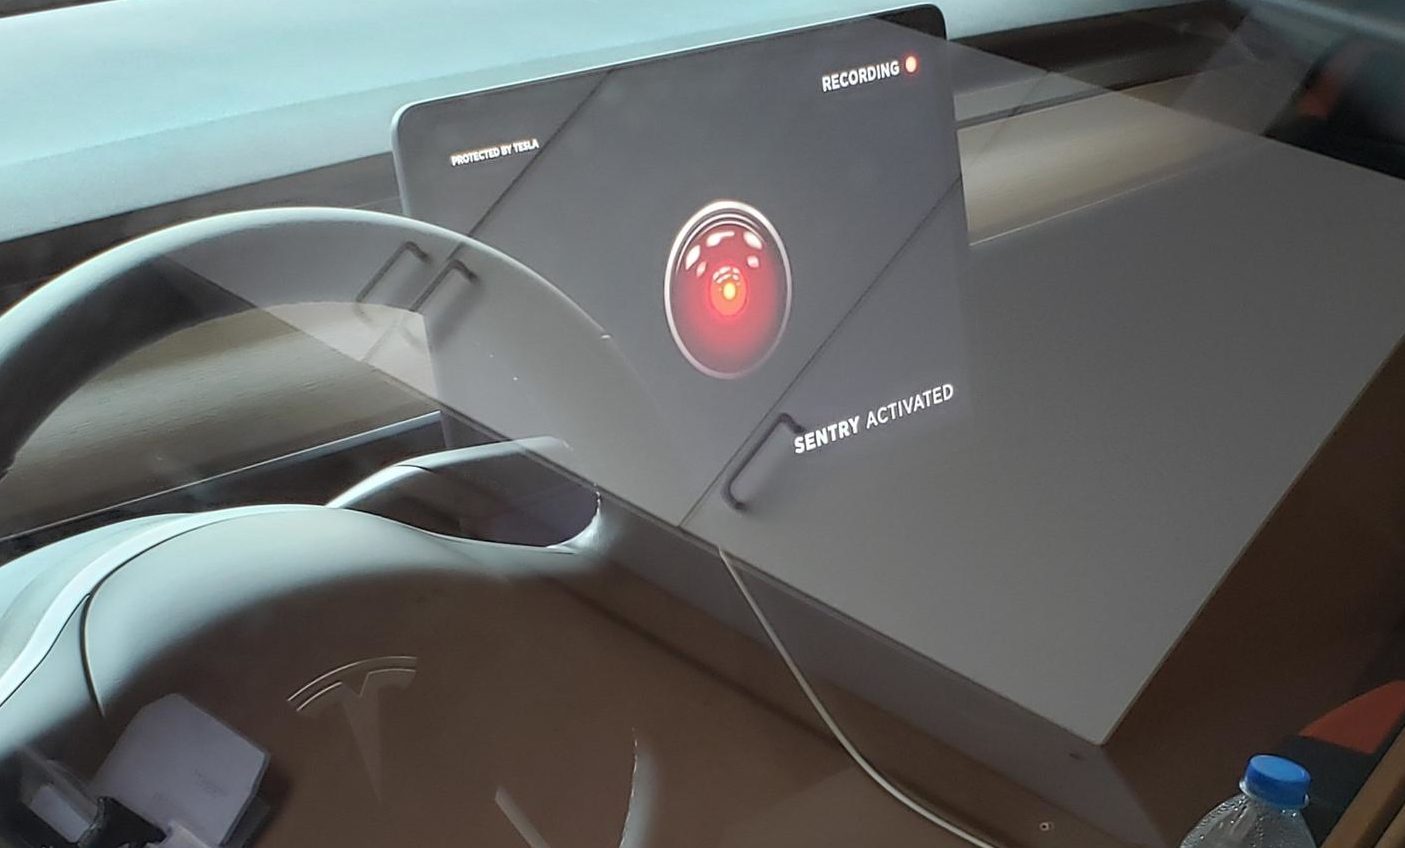 Tesla engineer explains why Sentry Mode is safe for vehicles’ speakers